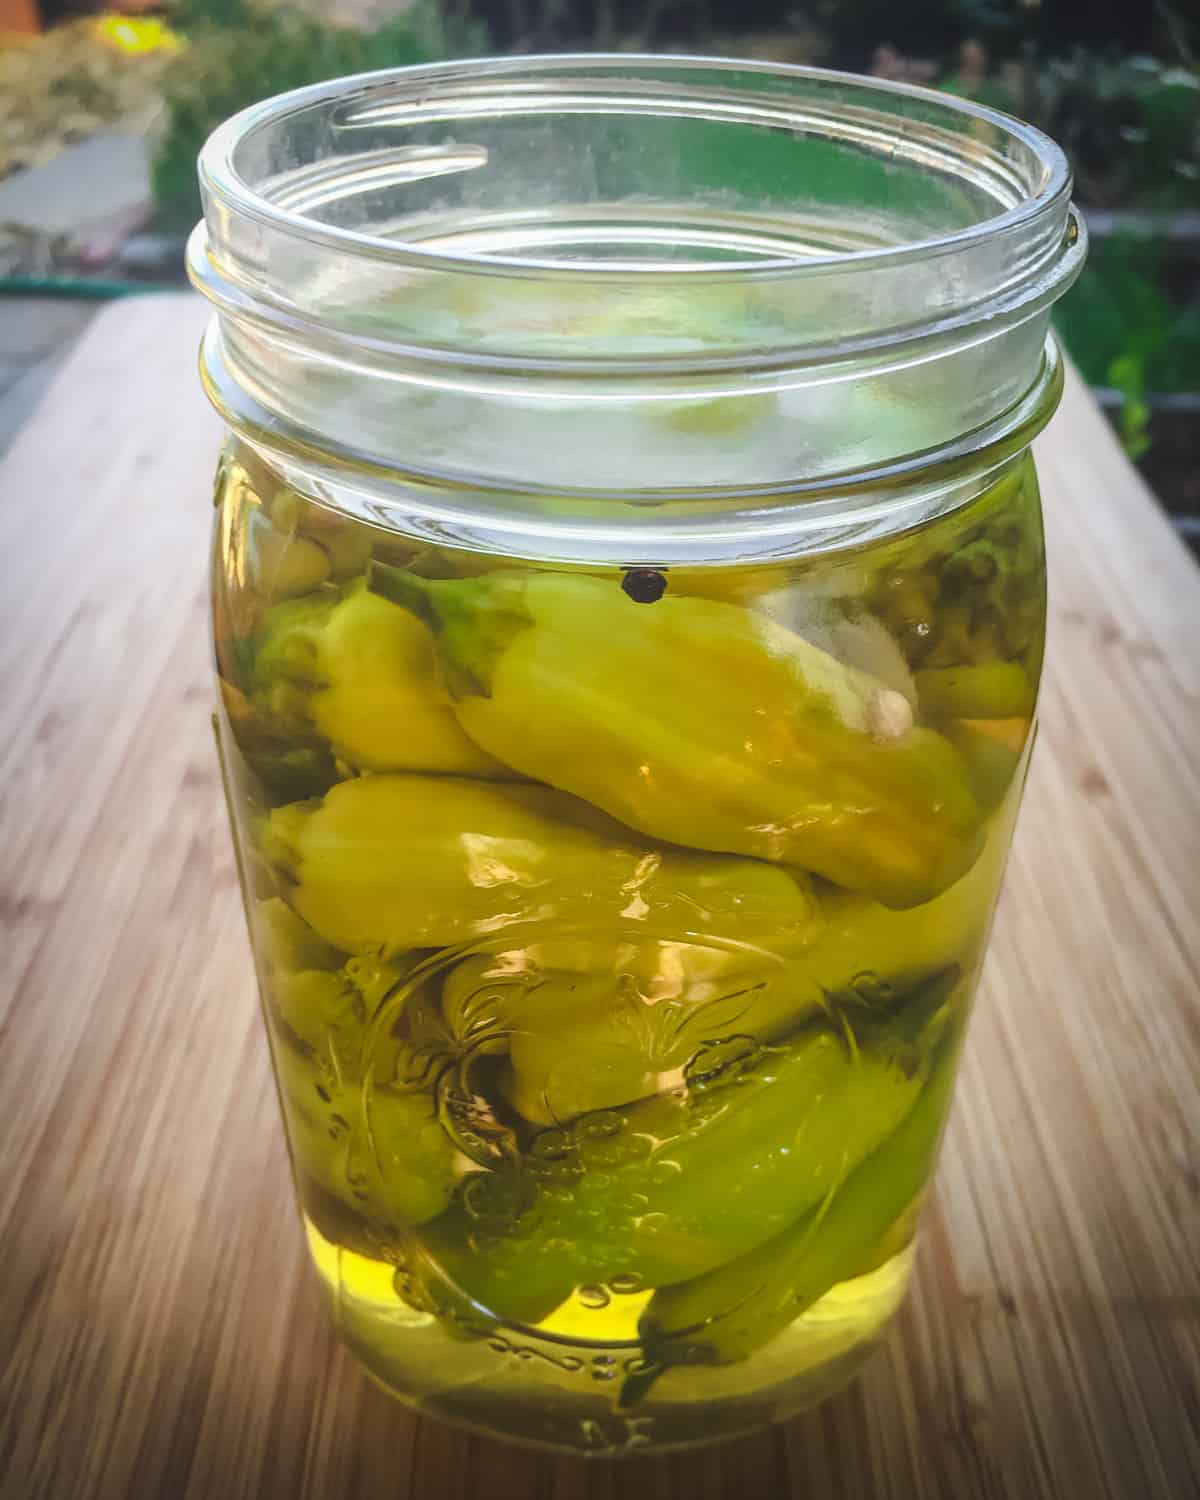 a quart jar of pickled pepperoncini peppers